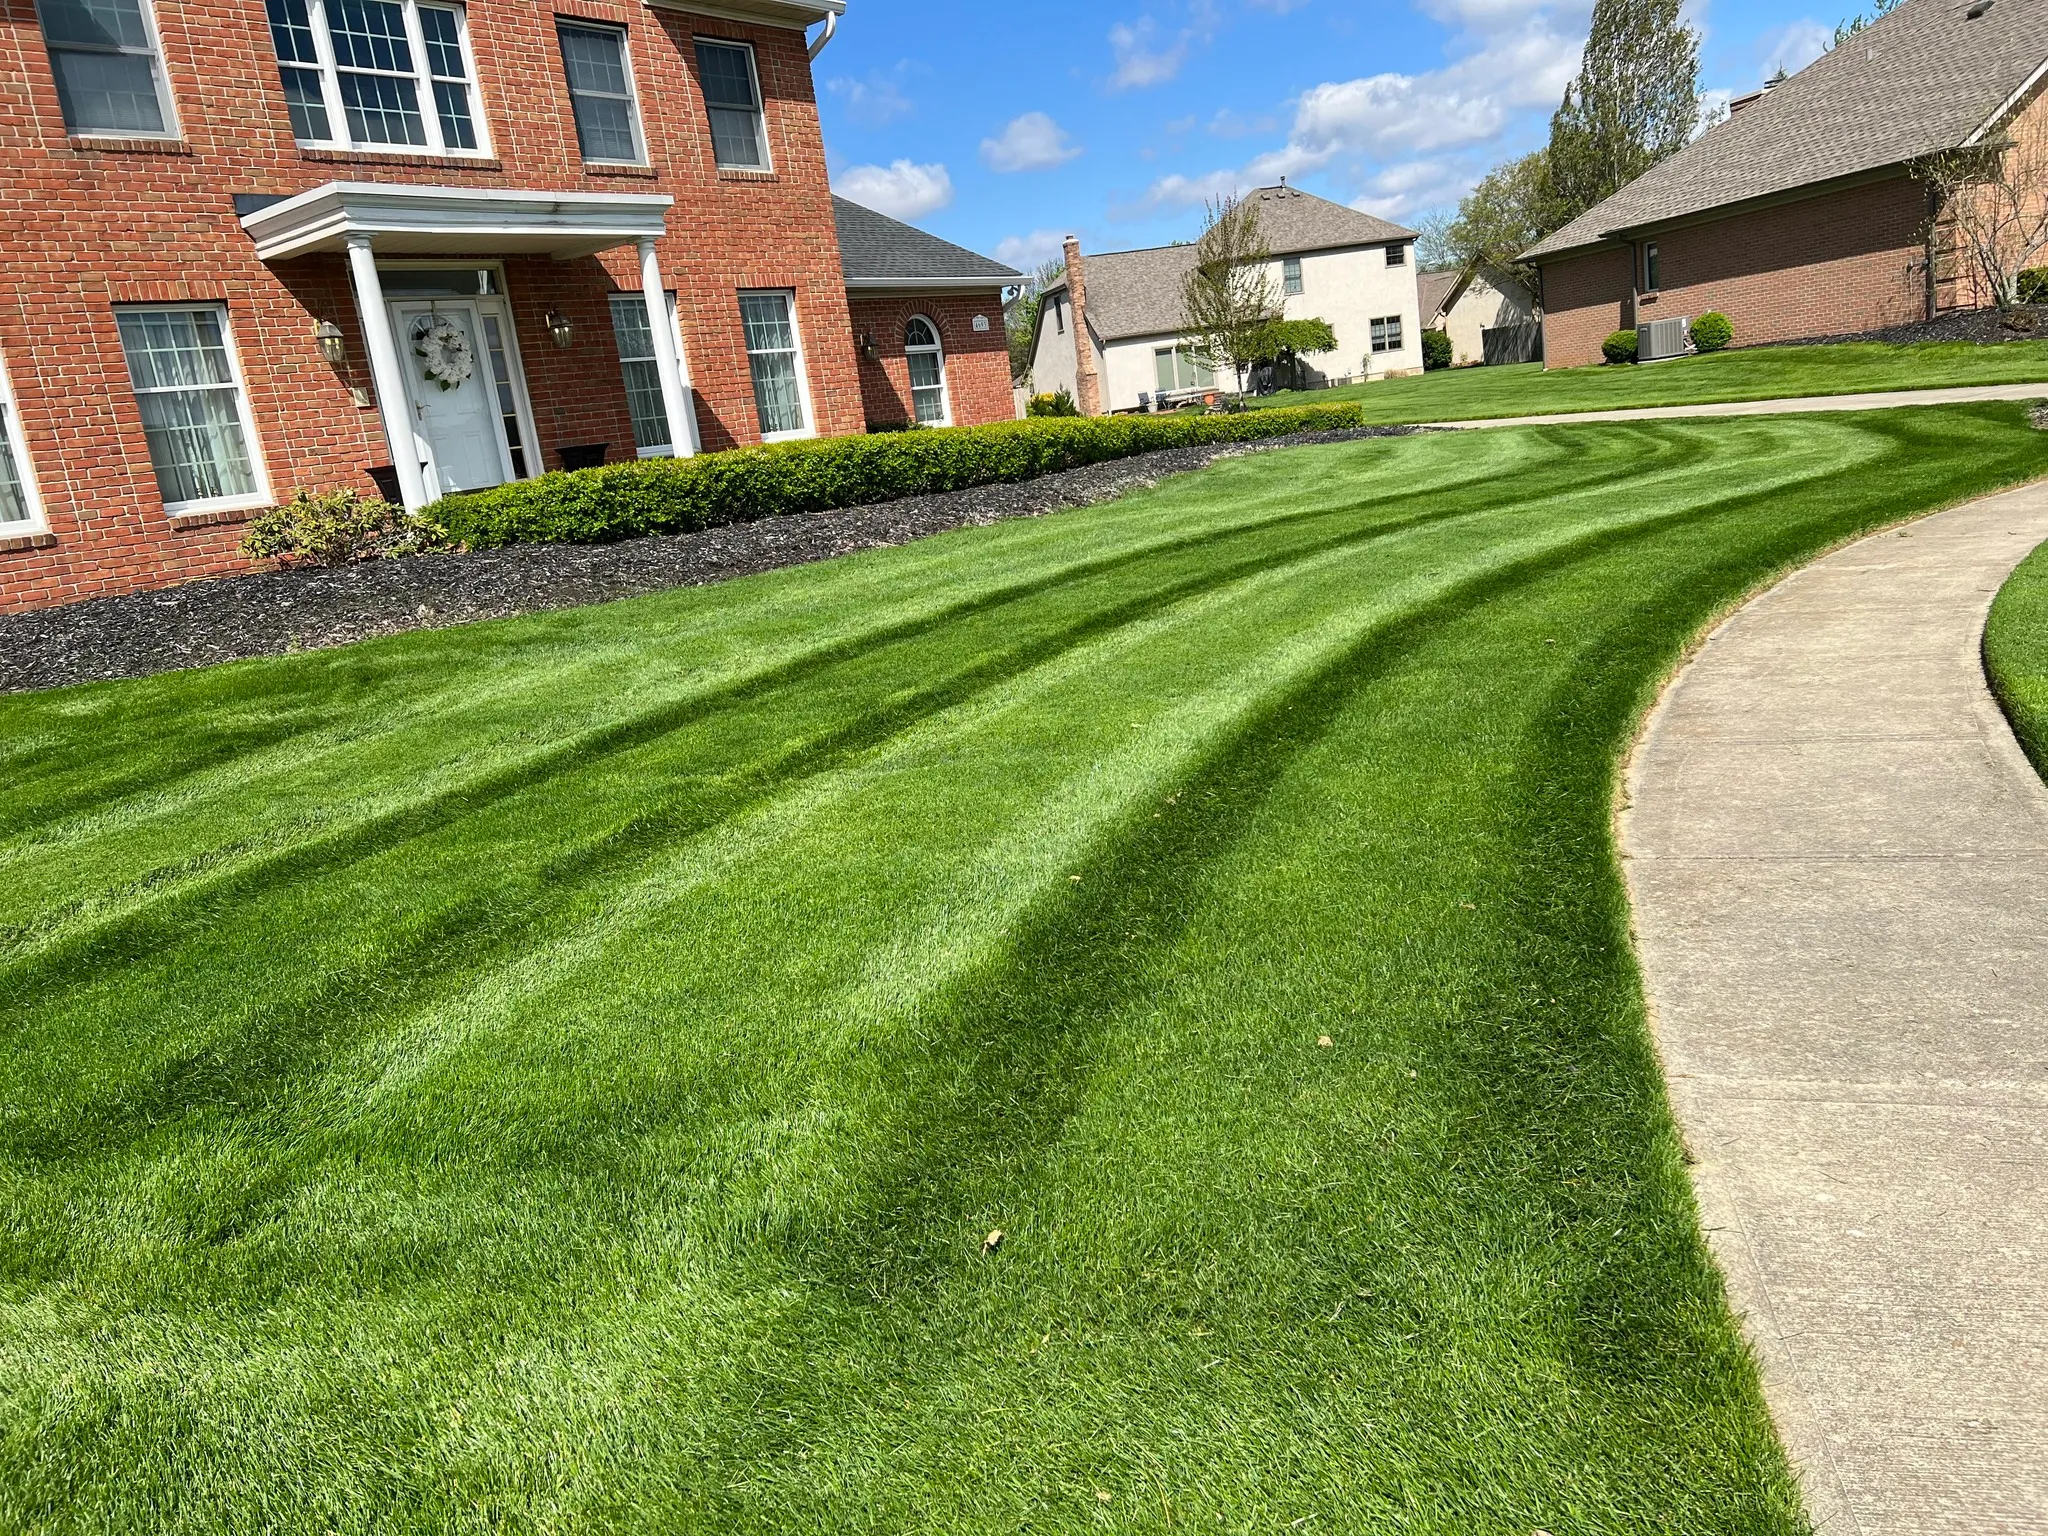 Mowing for Mark’s Mowing & Landscaping LLC  in Ashville, OH